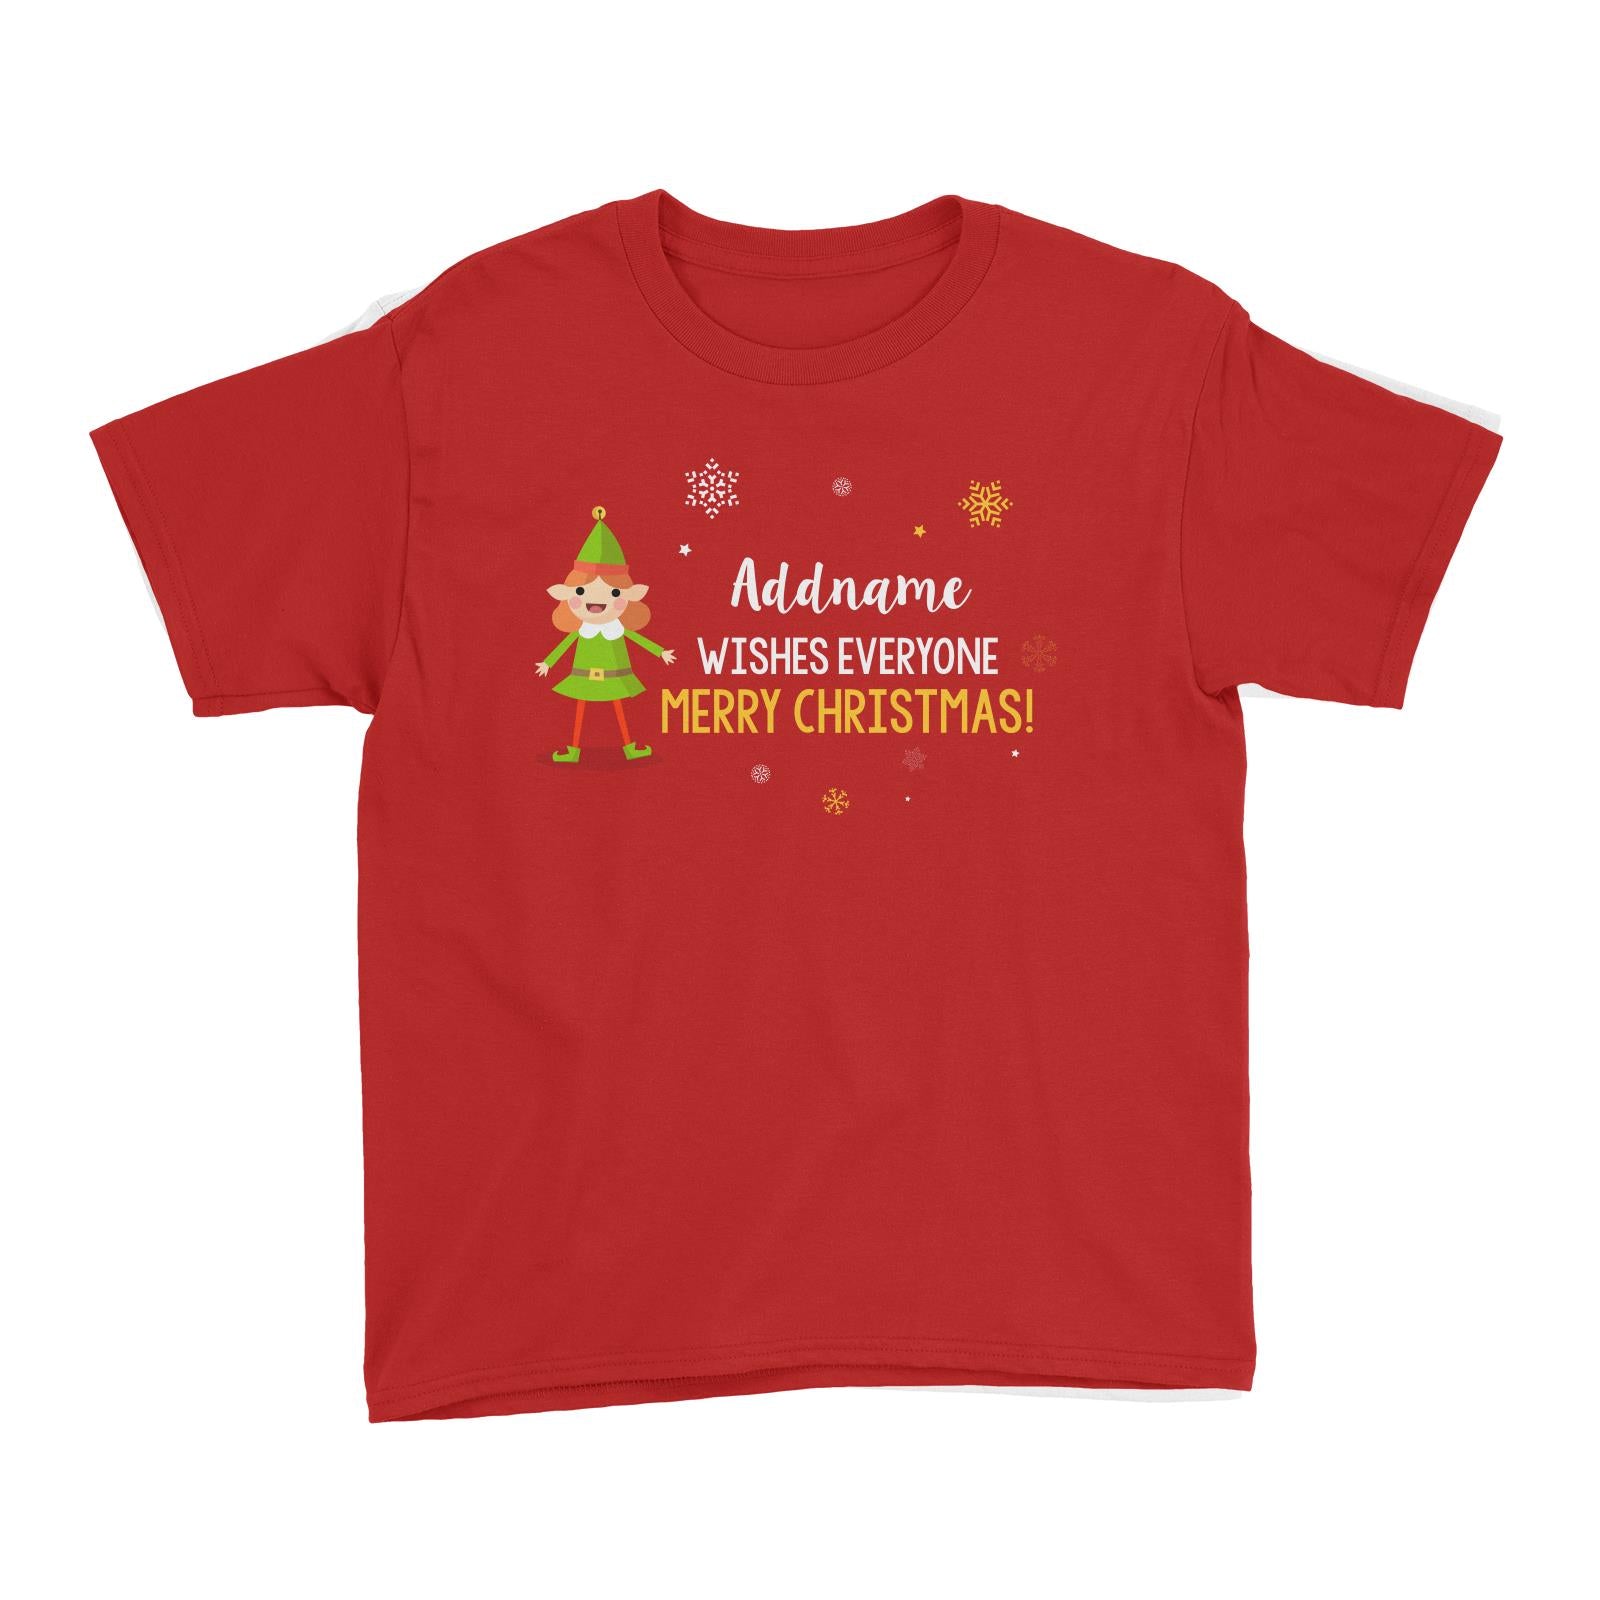 Cute Elf Girl Wishes Evryone Merry Christmas Addname Kid's T-Shirt  Matching Family Personalizable Designs